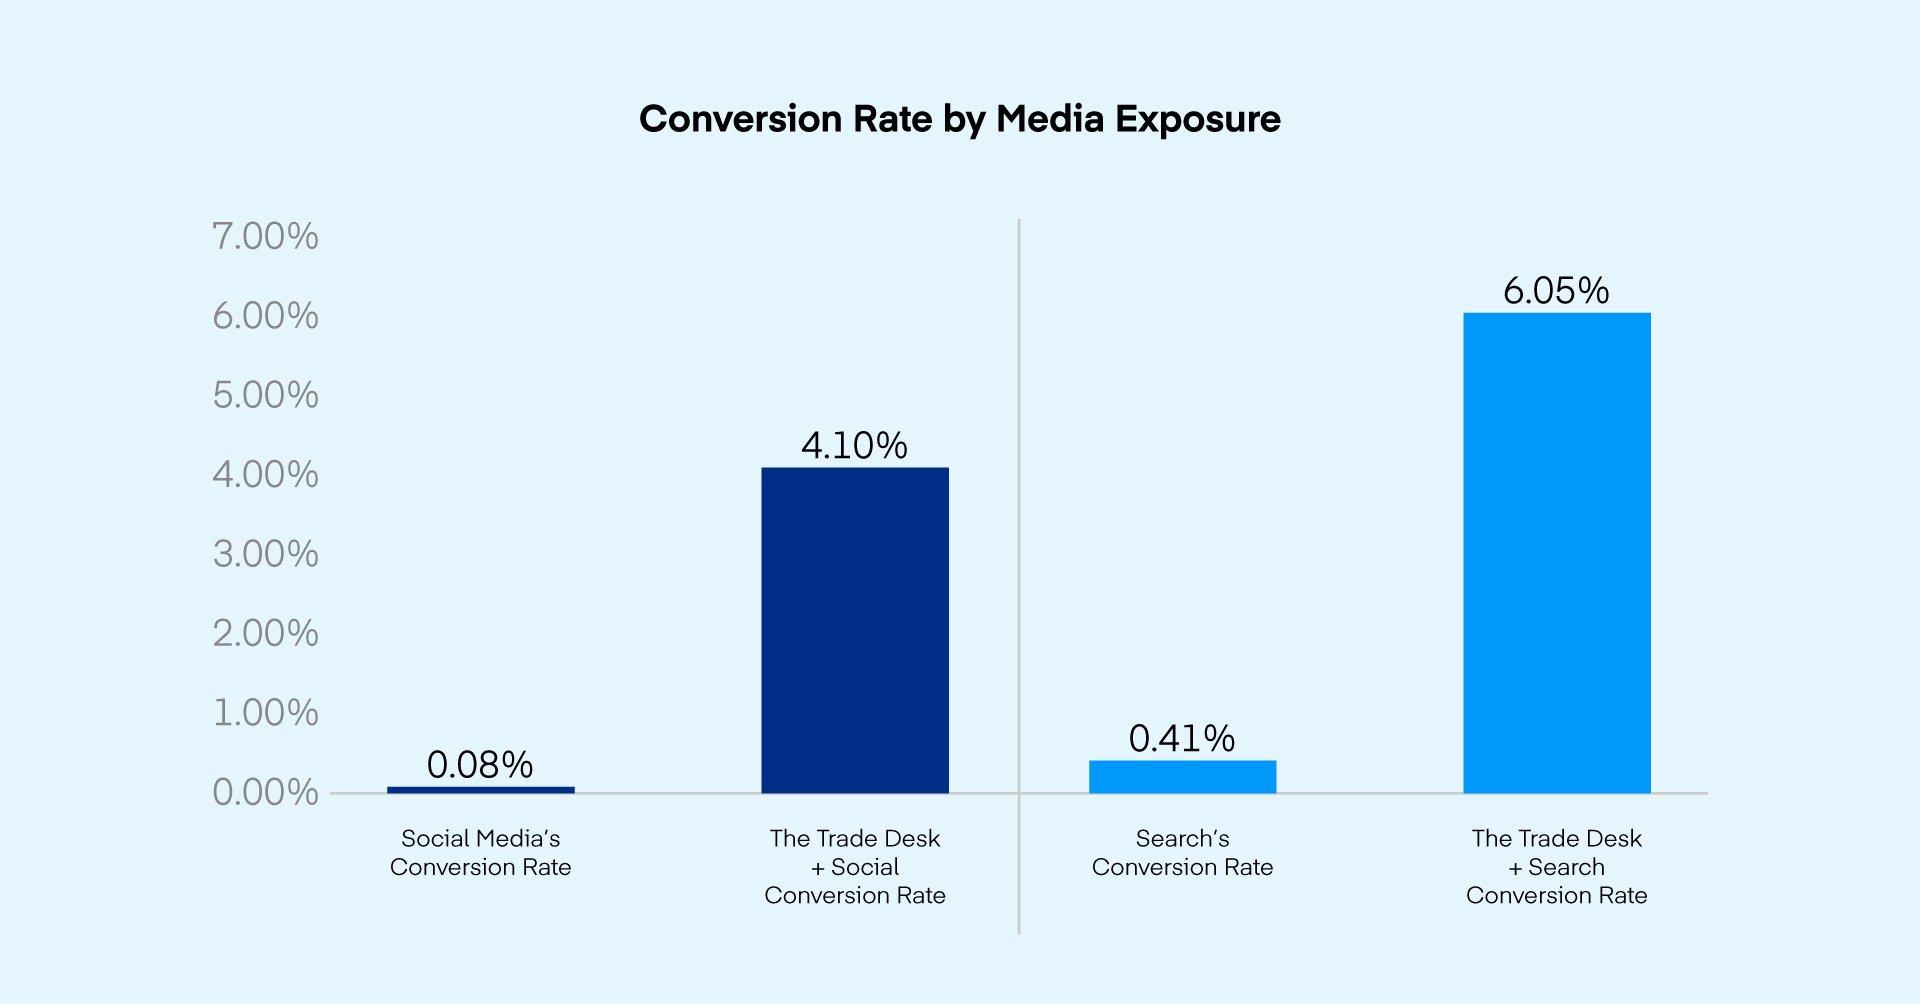 Bar chart showing the conversion rate by media exposure